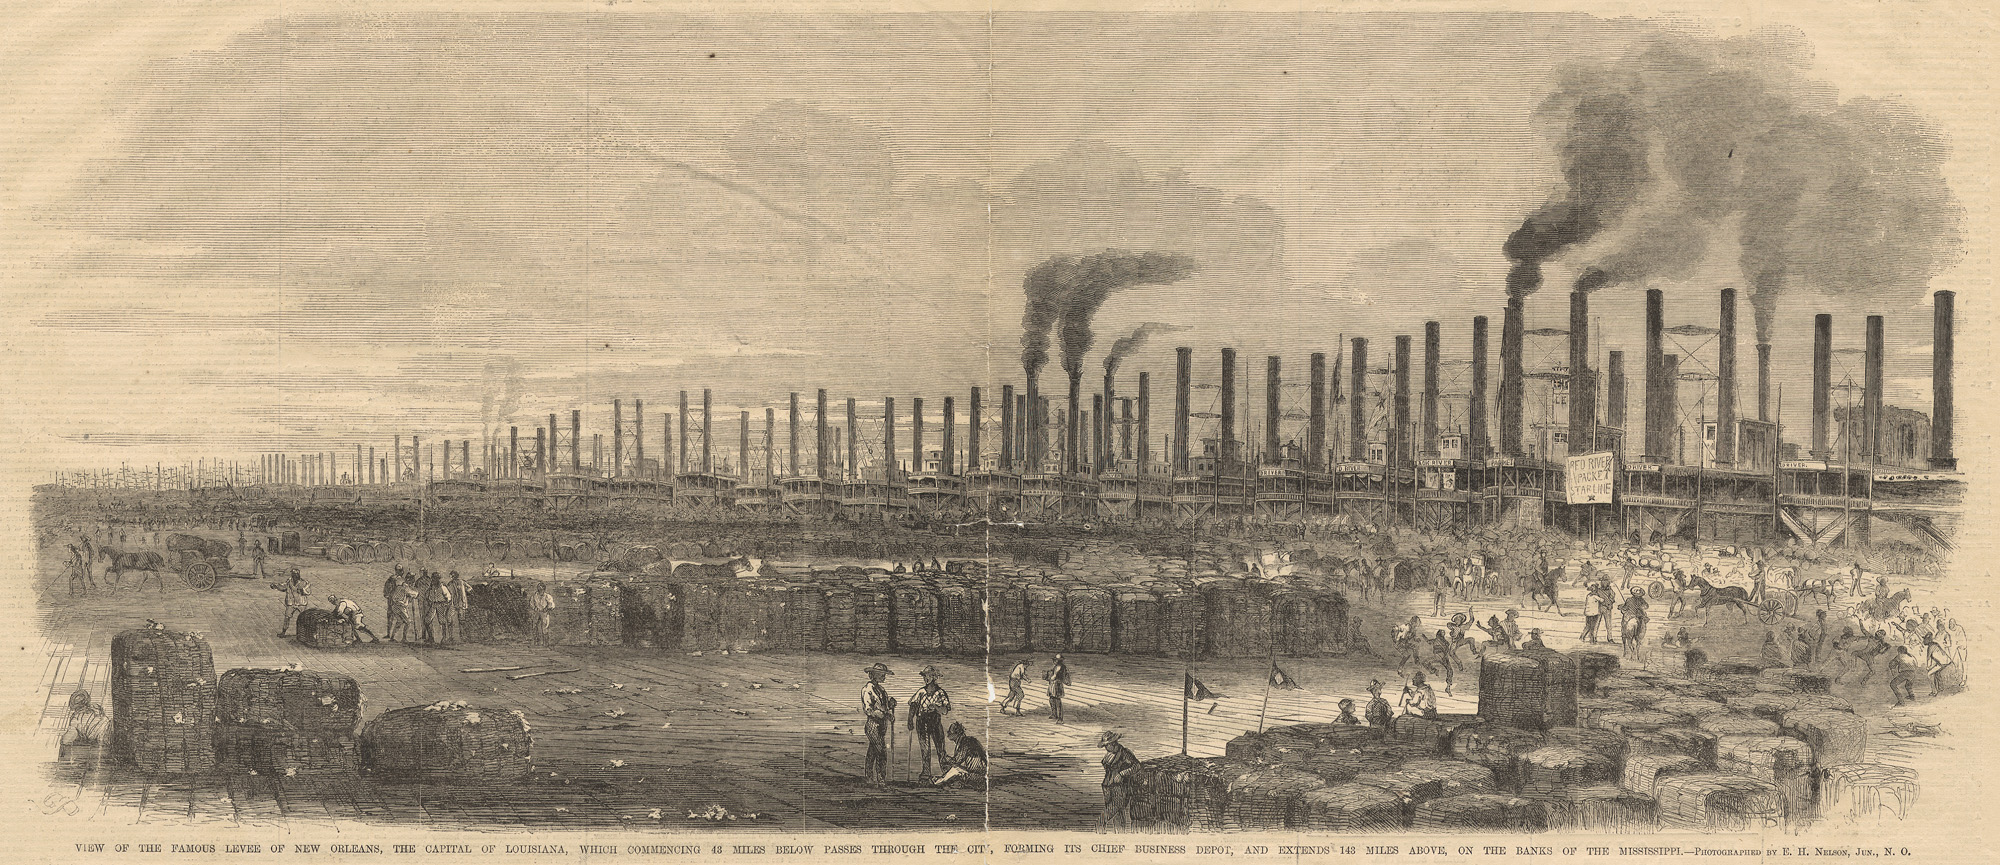 View of the Famous Levee of New Orleans, 1860 wood engraving from a photograph by E. H. Nelson, Frank Leslie’s Illustrated Newspaper (Chicago History Museum)